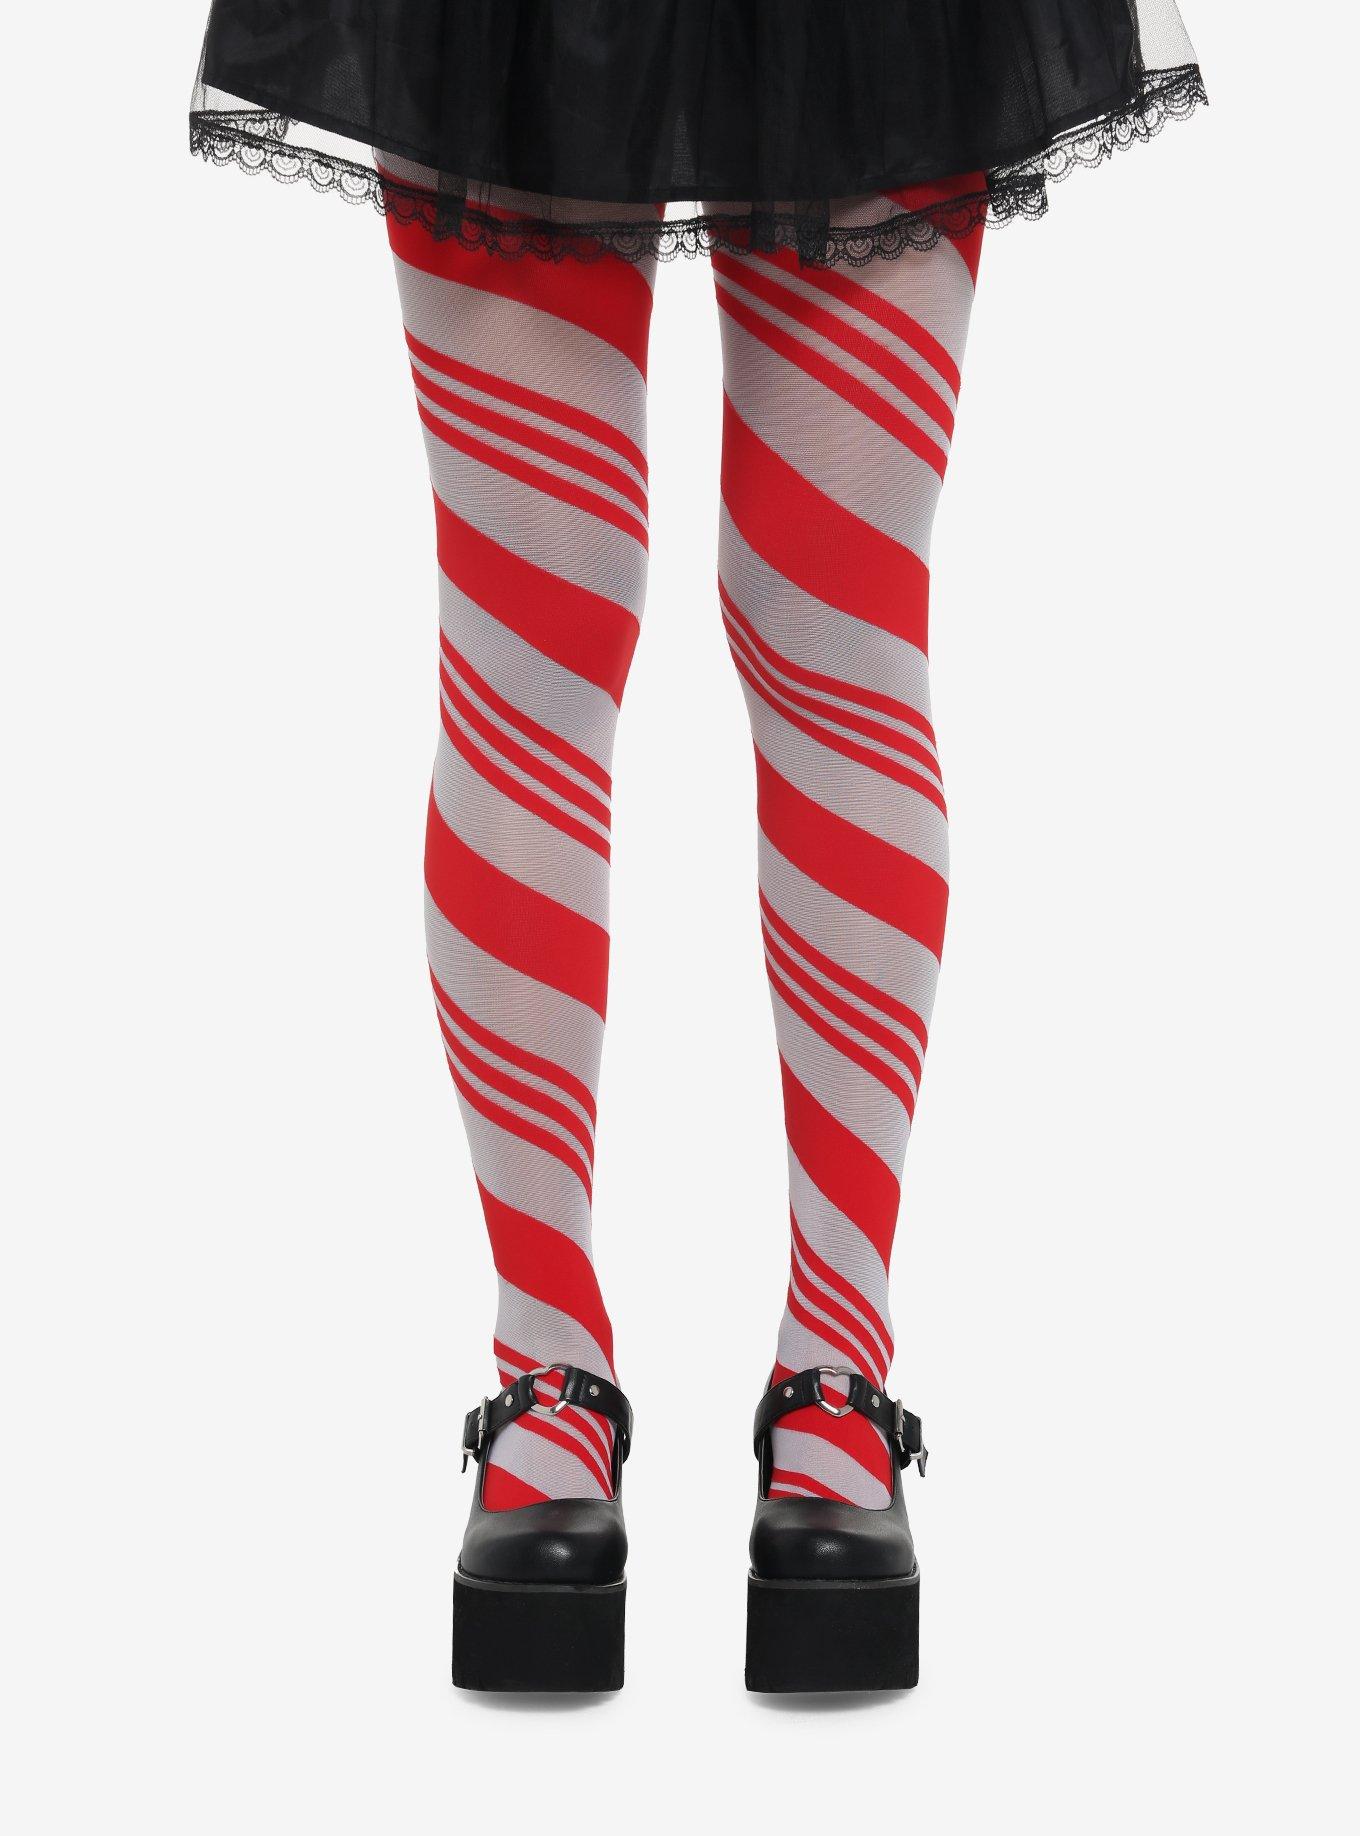 Candy Cane Stripe Tights